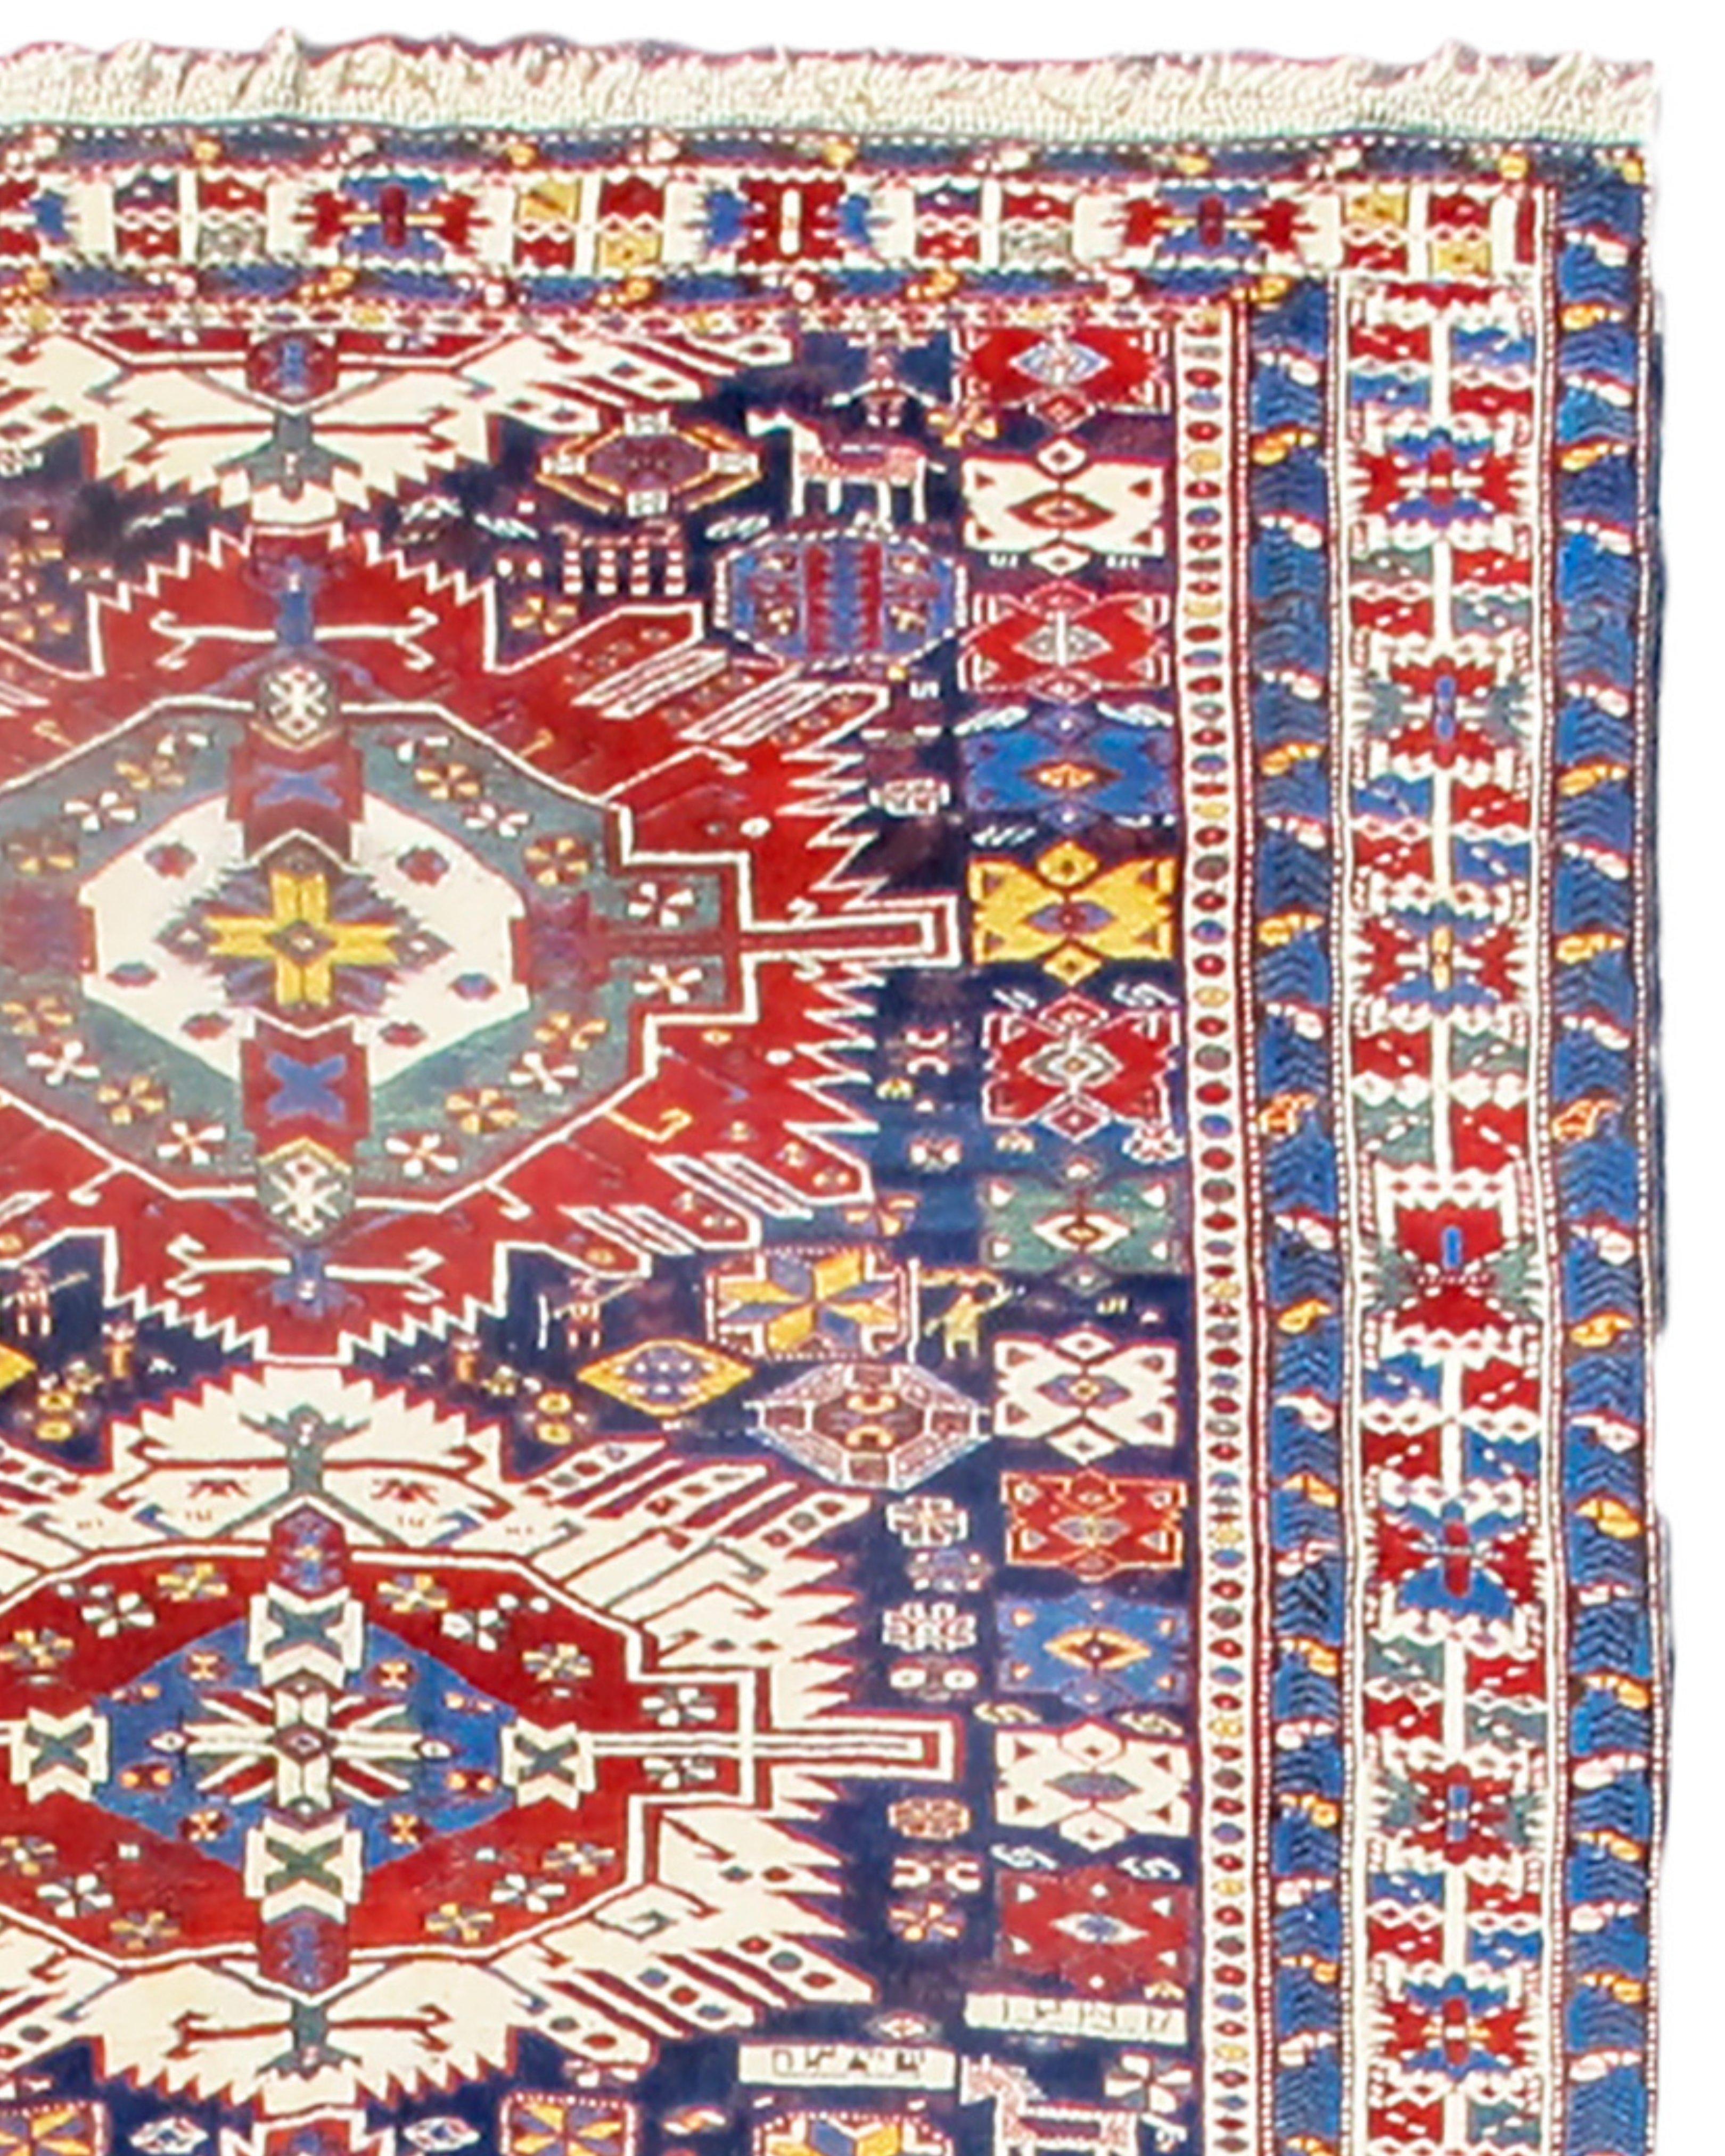 Antique Caucasian Zejwa Kuba Long Rug, Early 20th Century

Additional Information:
Dimensions: 5'0